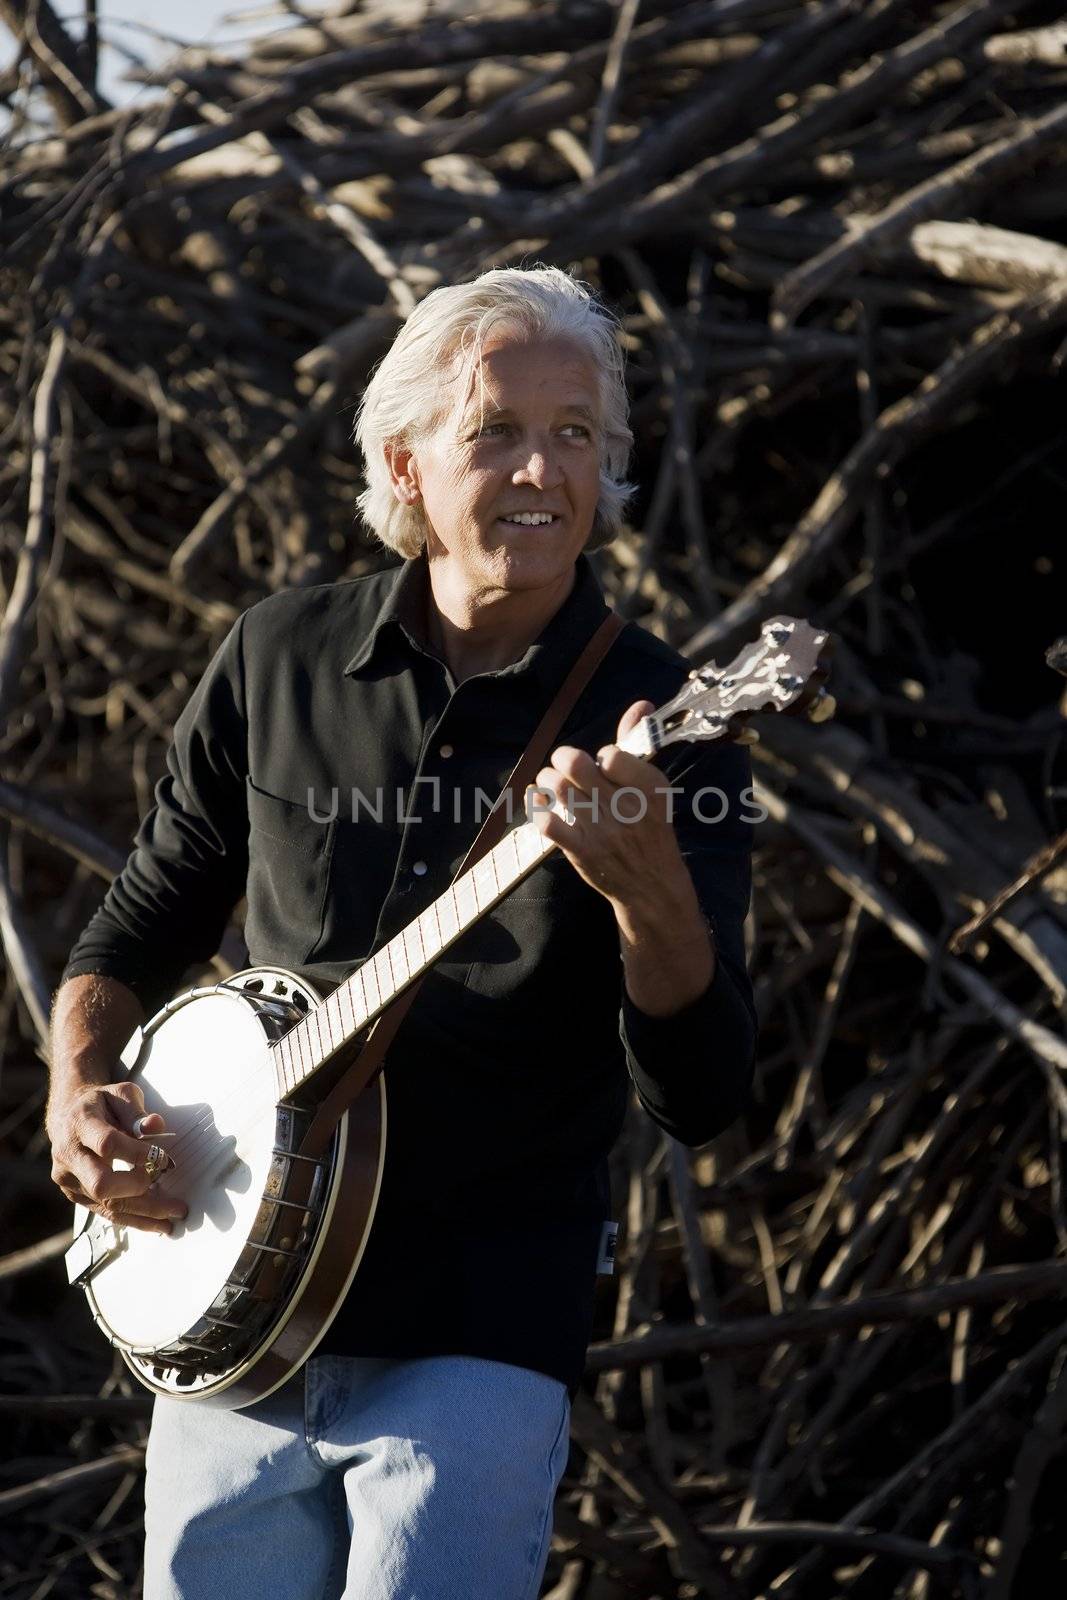 Banjo Player in Front of a Big Pile of Wood